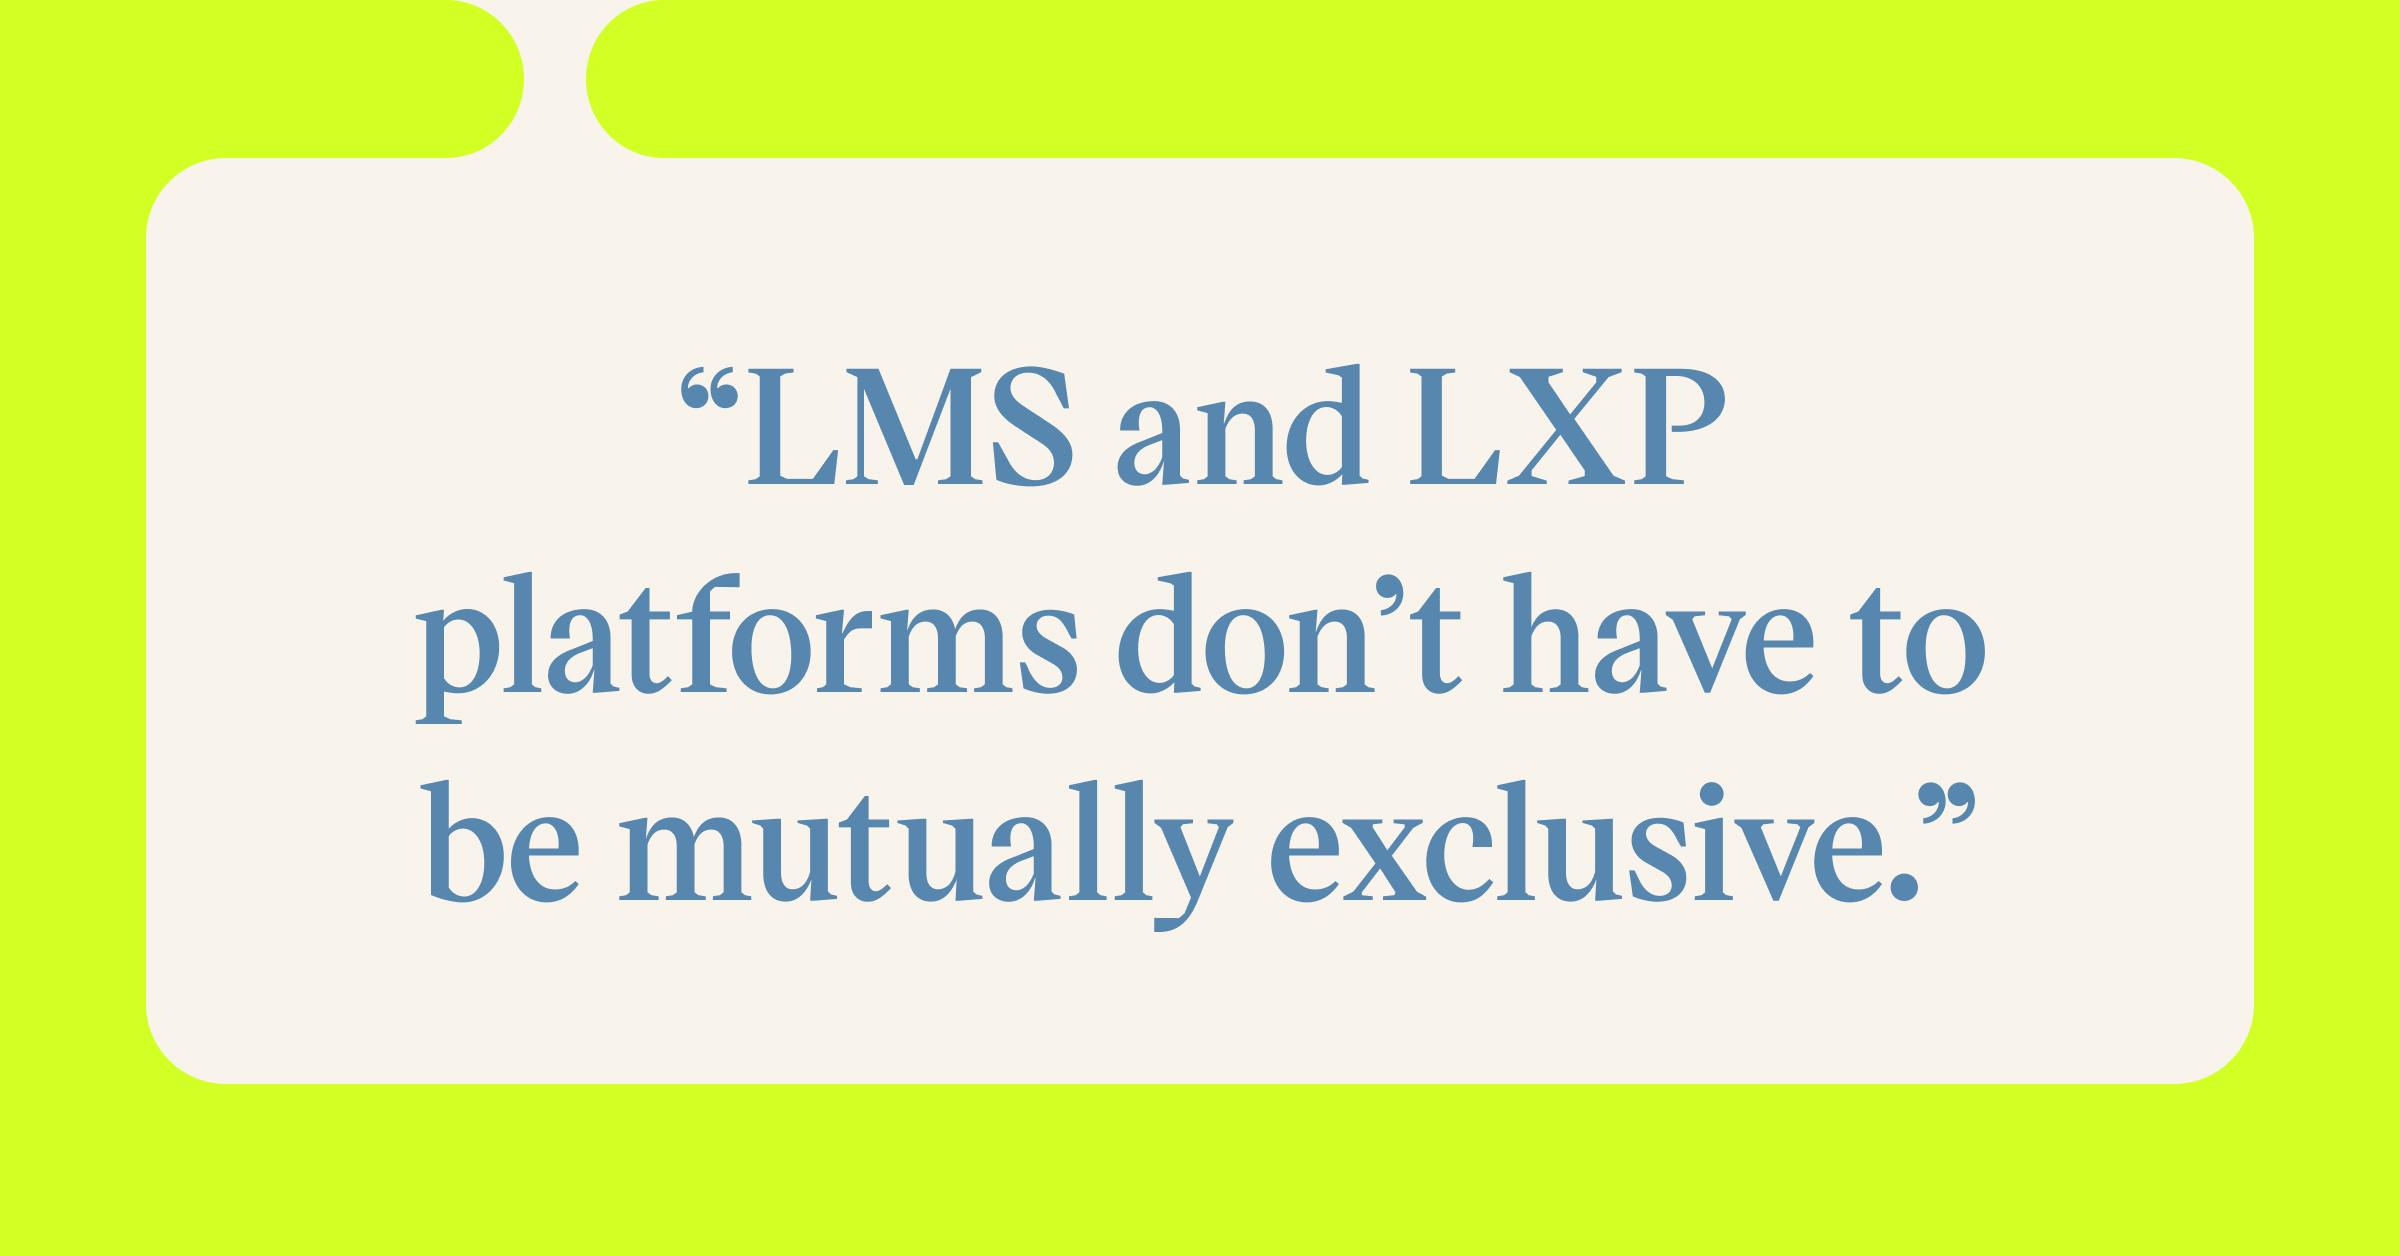 Pull quote with the text: LMS and LXP platforms don't have to be mutually exclusive